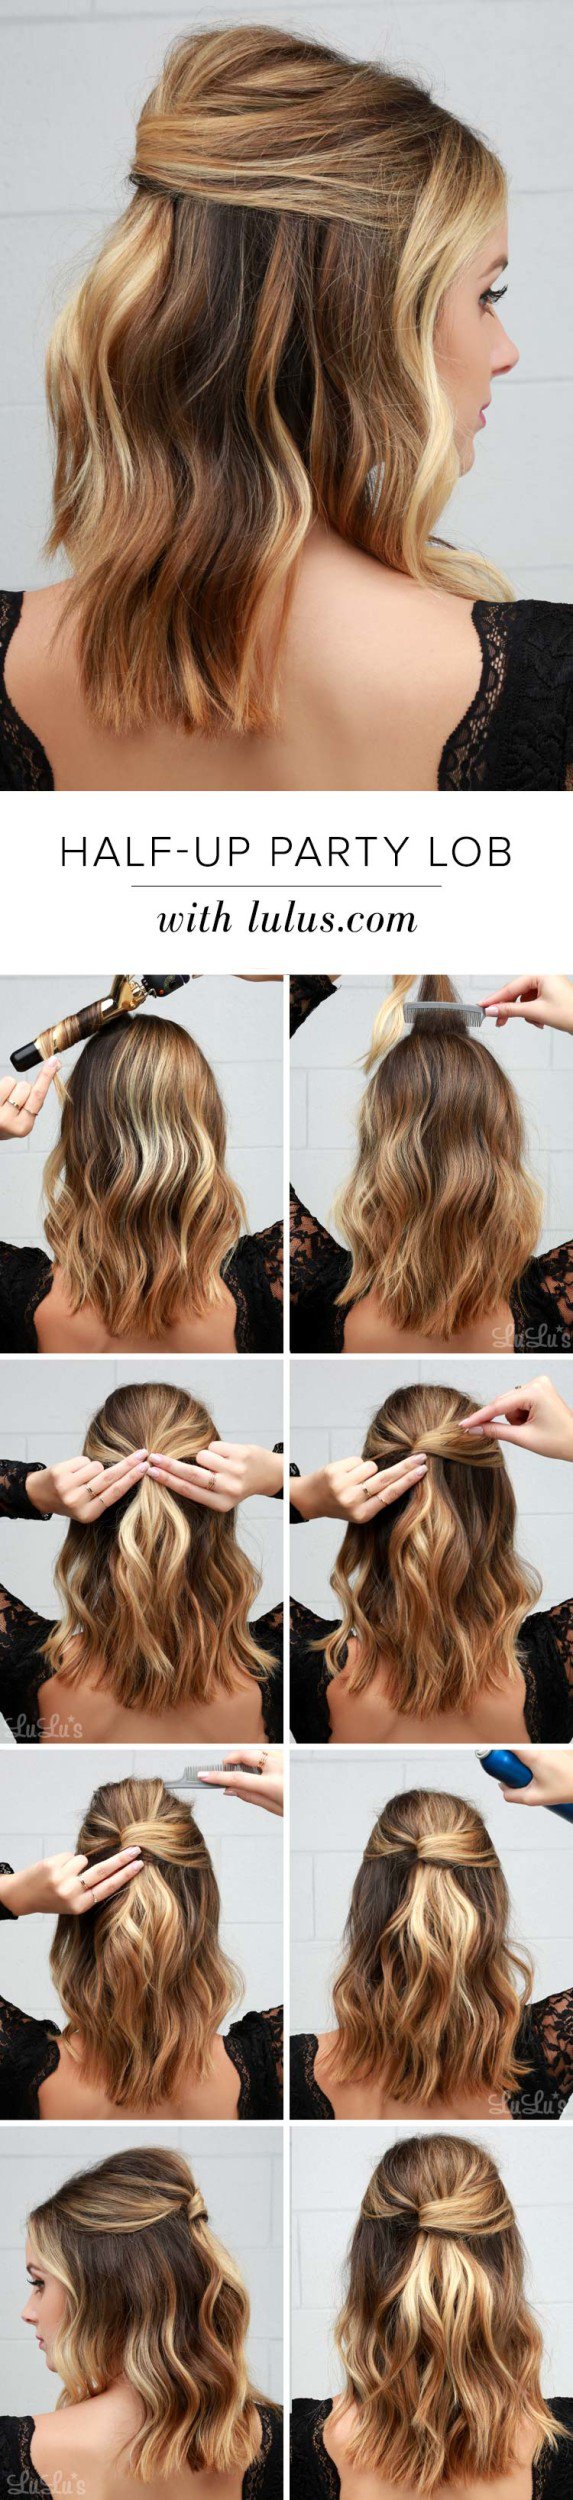 10 Simple And Easy Lazy Girl Hairstyle Tips That Are Done In Less Time